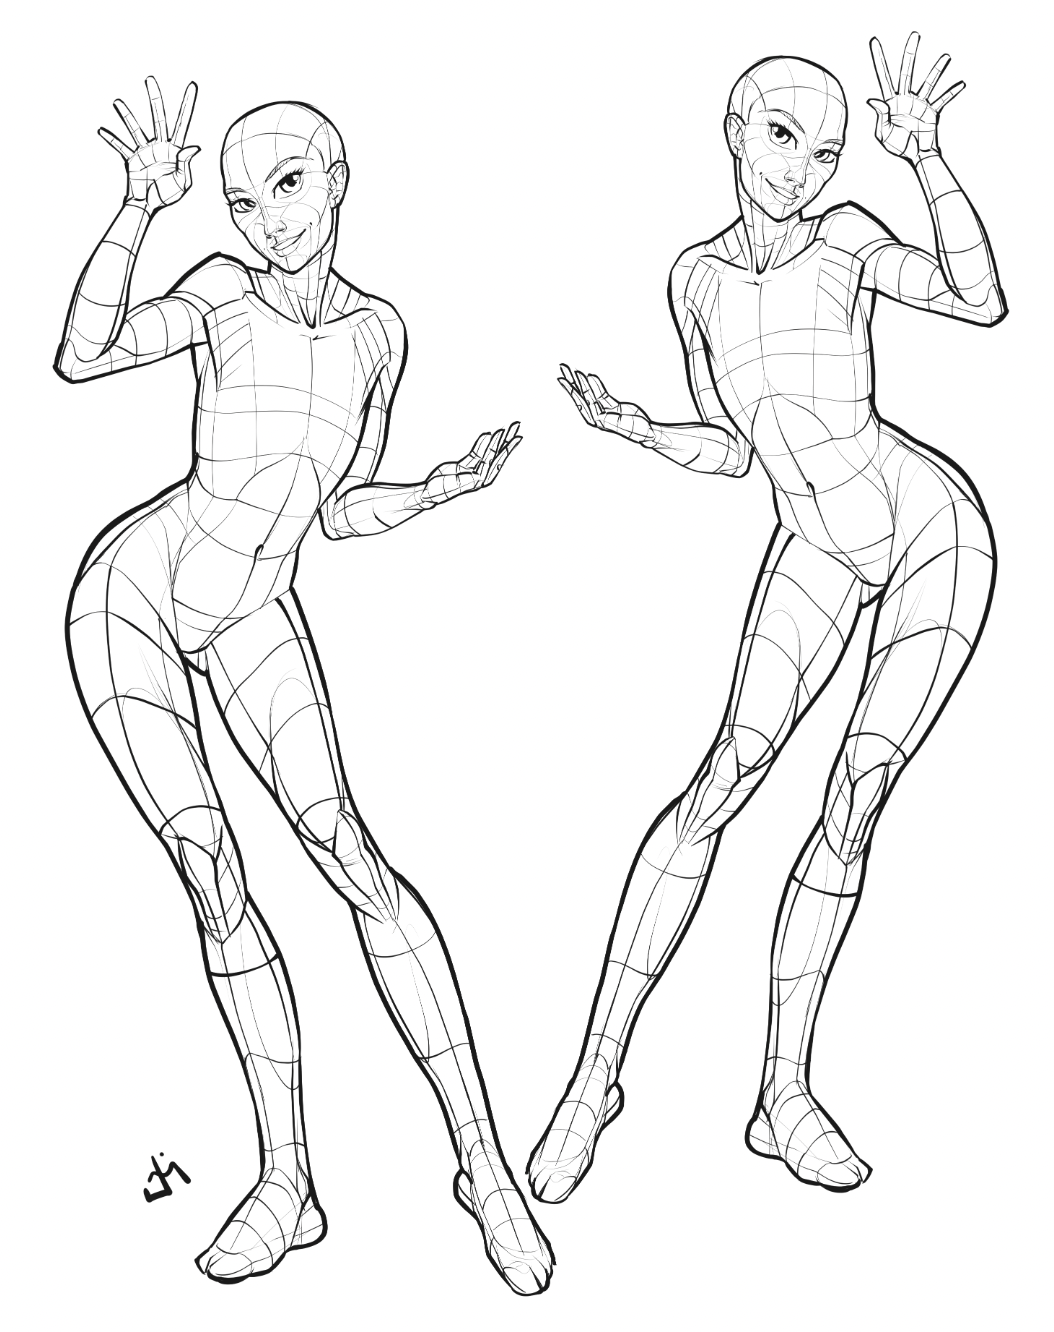 3 Levels of Dynamic Poses by ZeroQ_Vern - Make better art | CLIP STUDIO TIPS